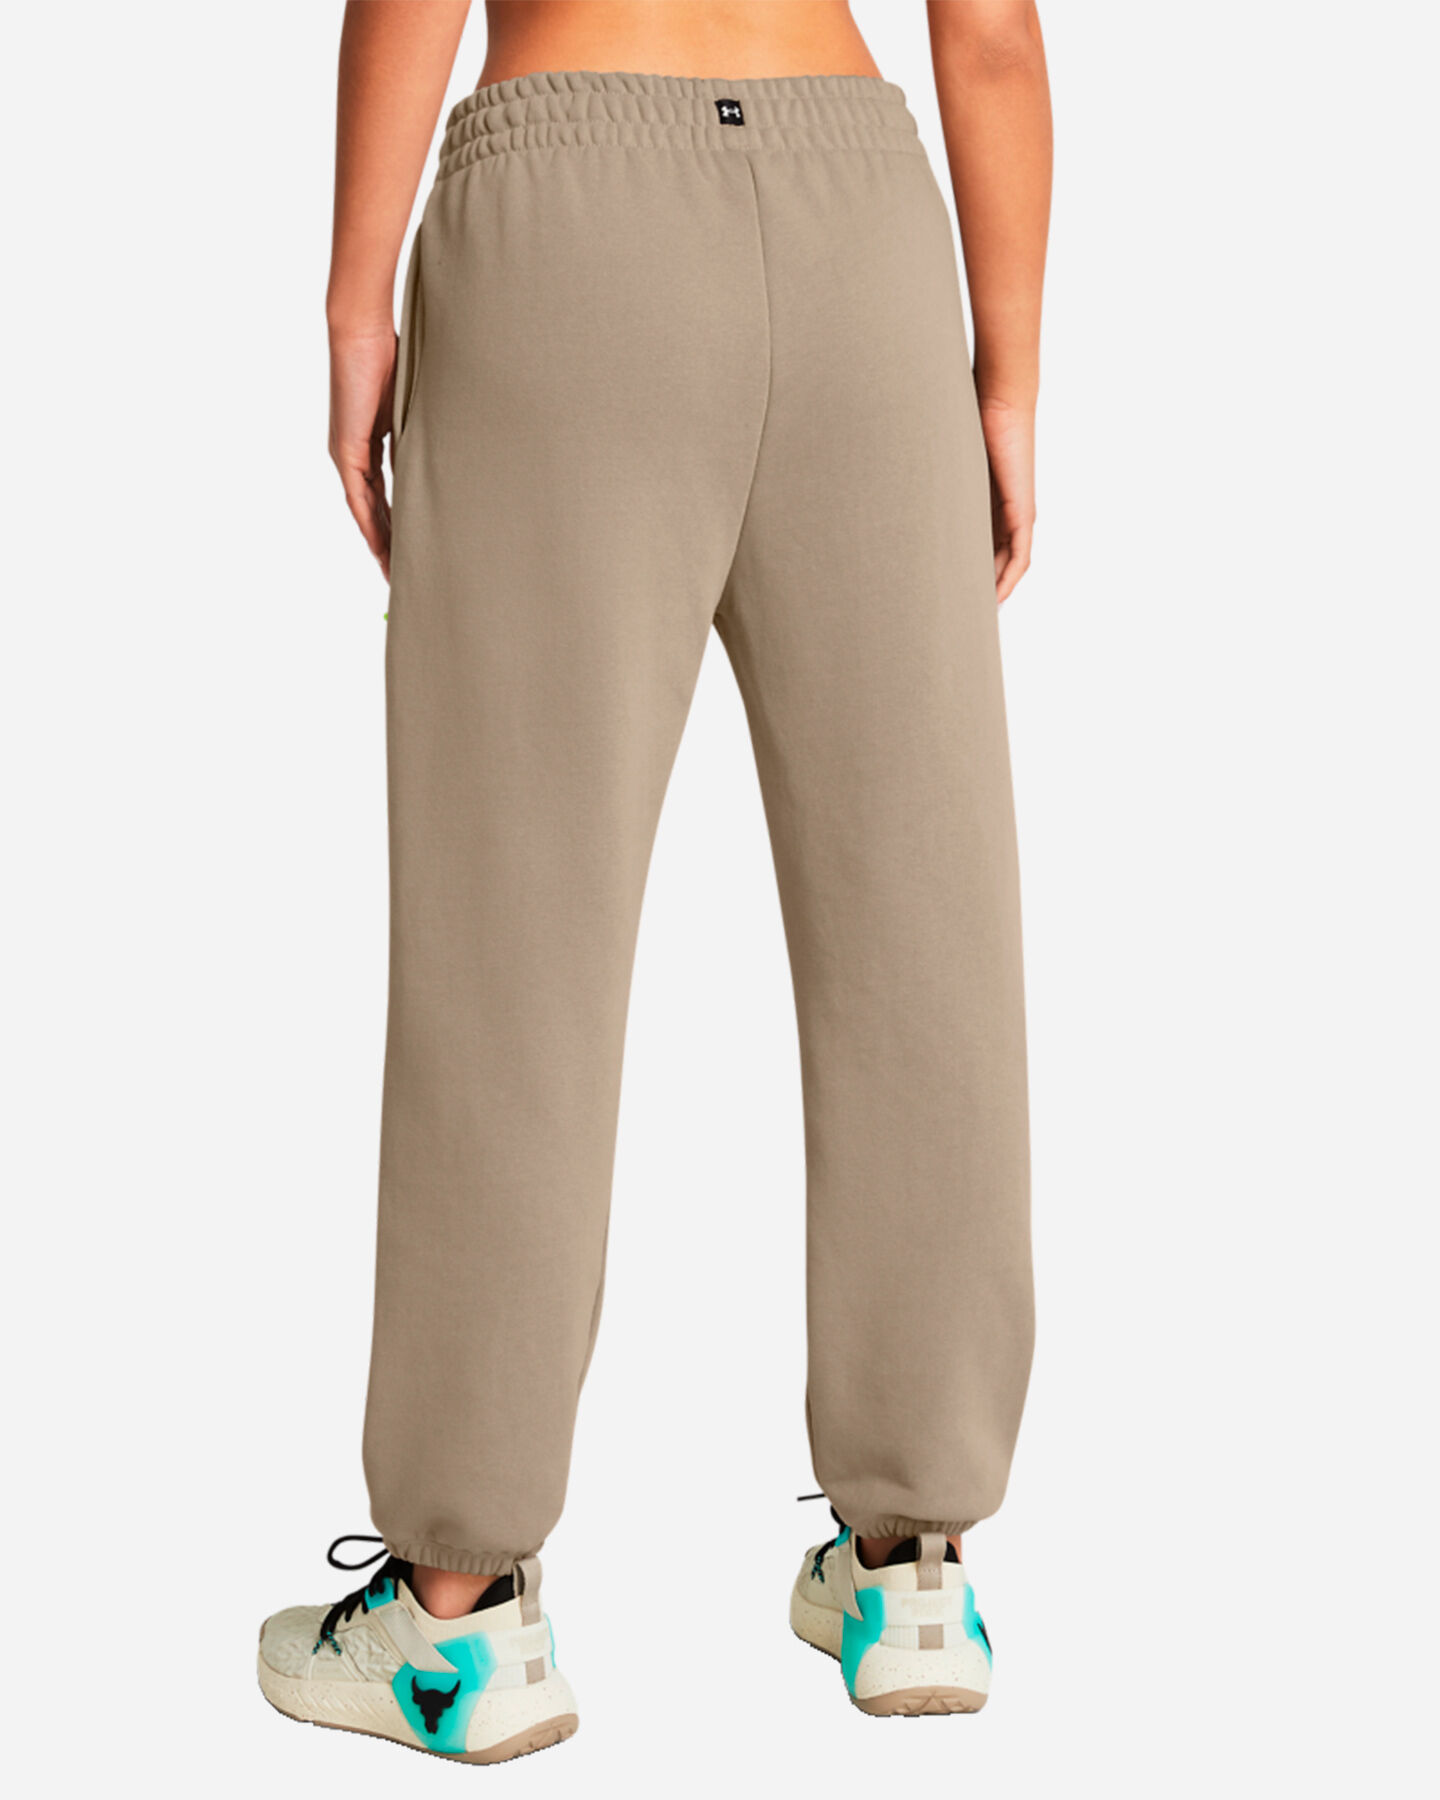  Pantalone UNDER ARMOUR PJT ROCK Q1 W S5641775|0203|XS scatto 3